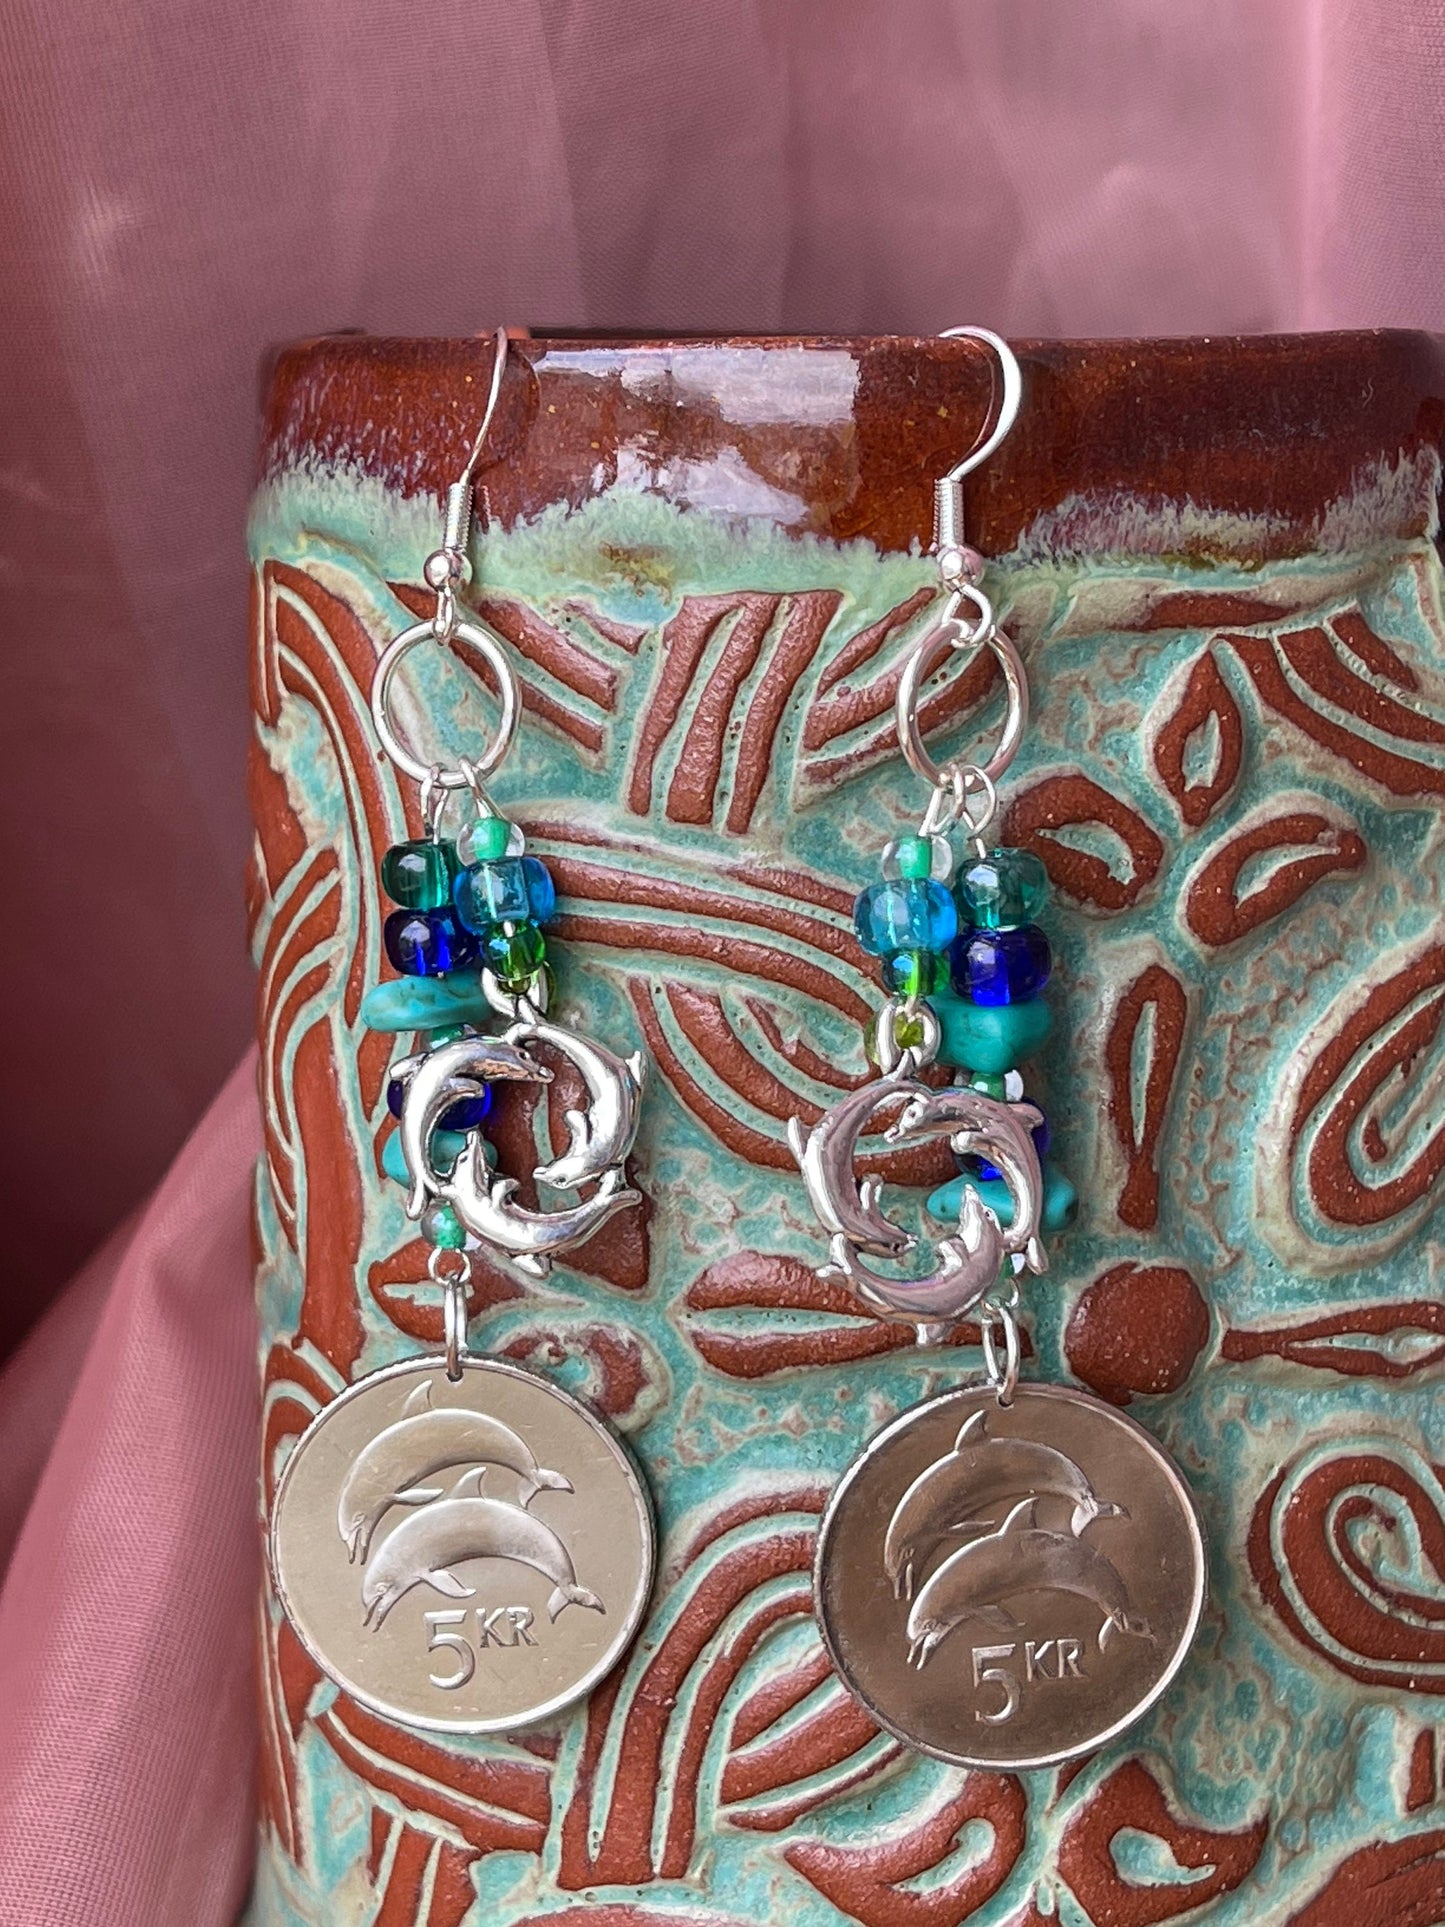 Dolphin coins dangle earrings - Earth Day Sterling Silver plated designer jewelry - Three dolphins sea life charm - blue glass turquoise gem